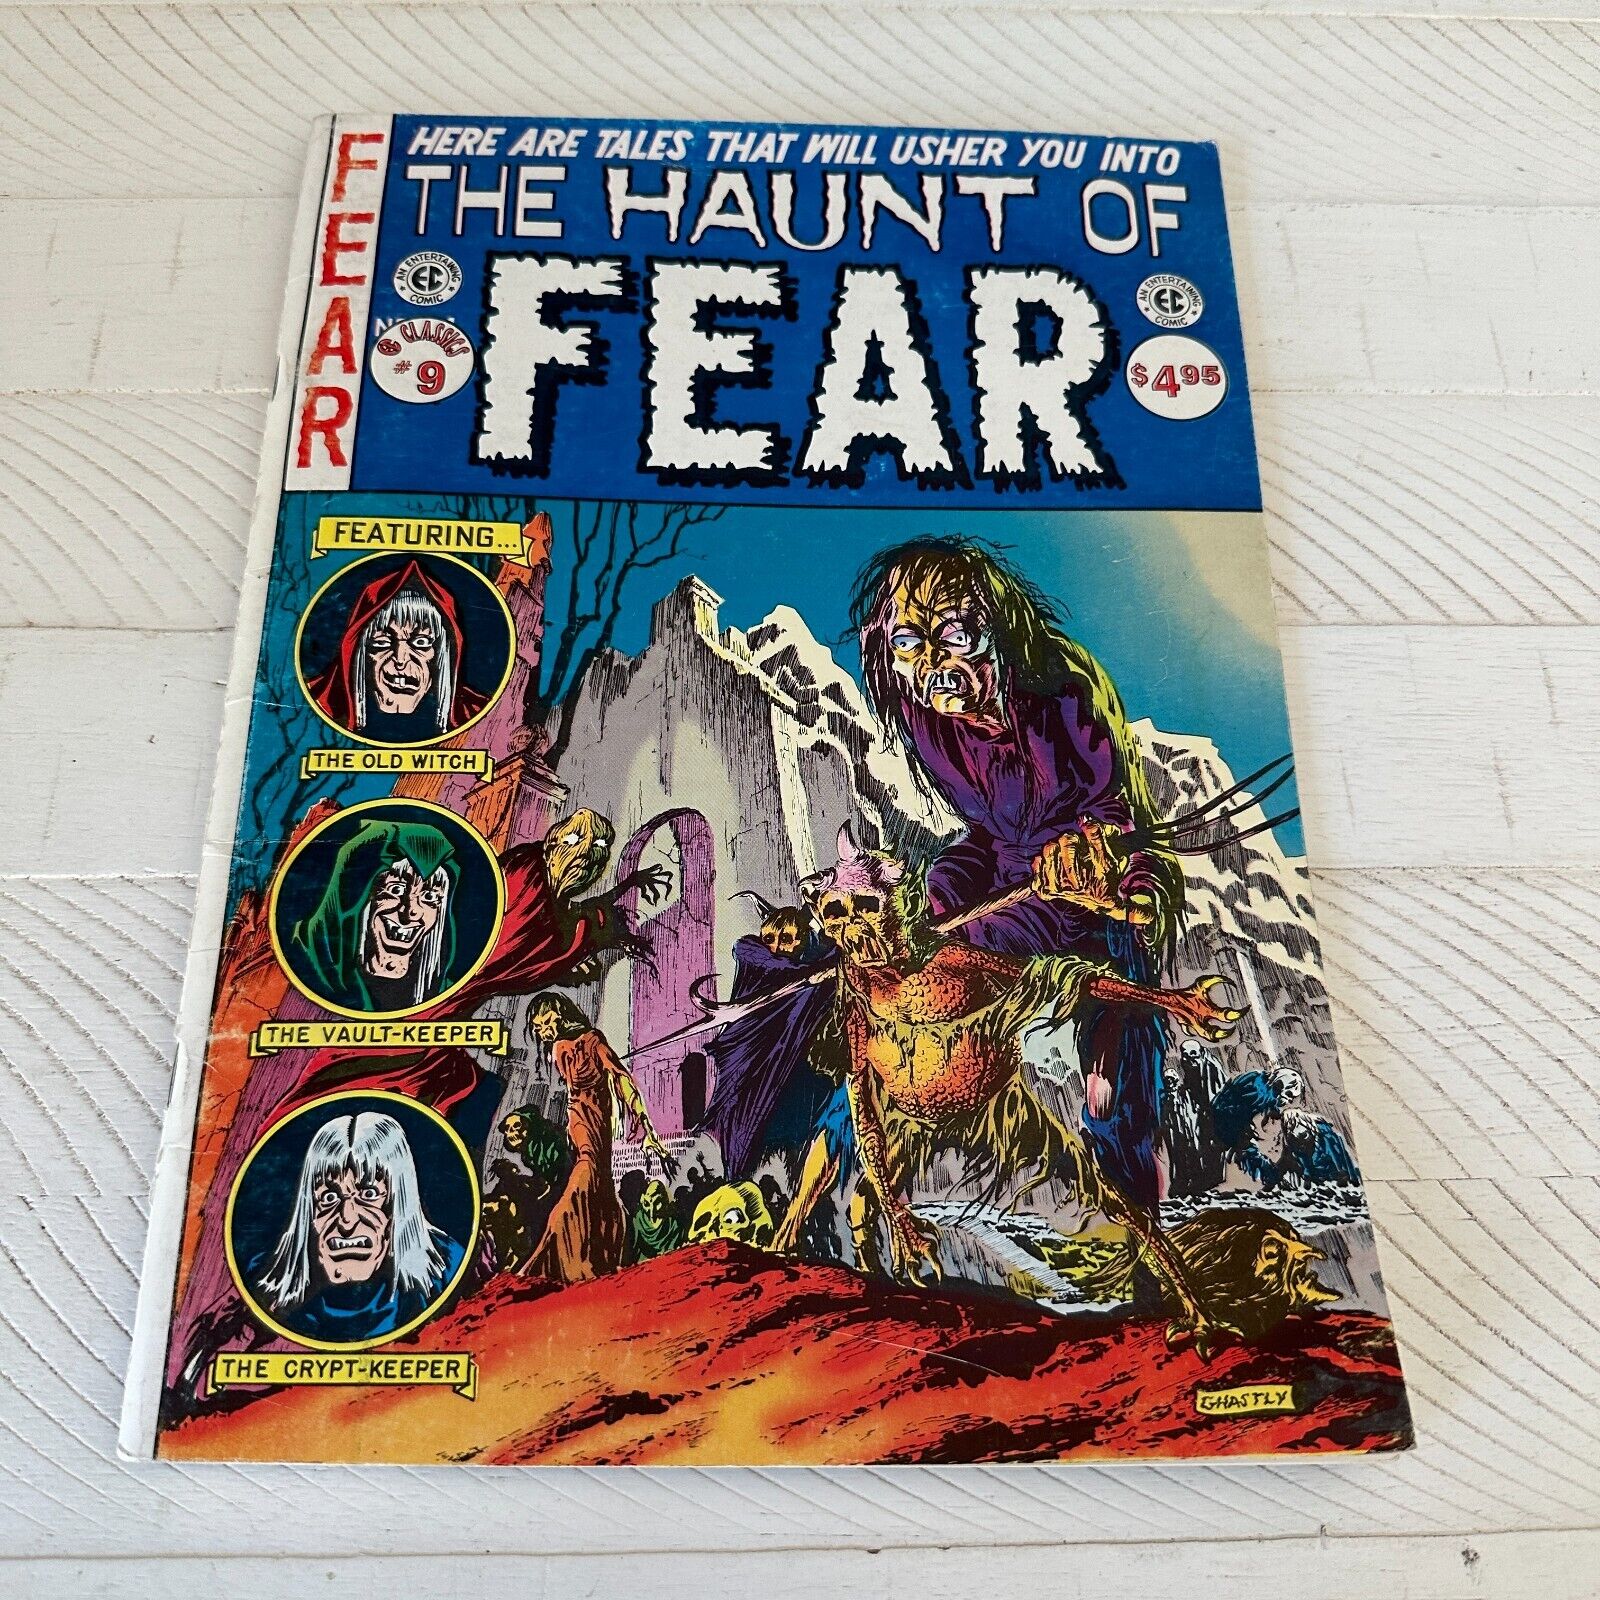 The Haunt Of Fear 9 EC Classics Here Are The Tales That Will Usher You Into VTG